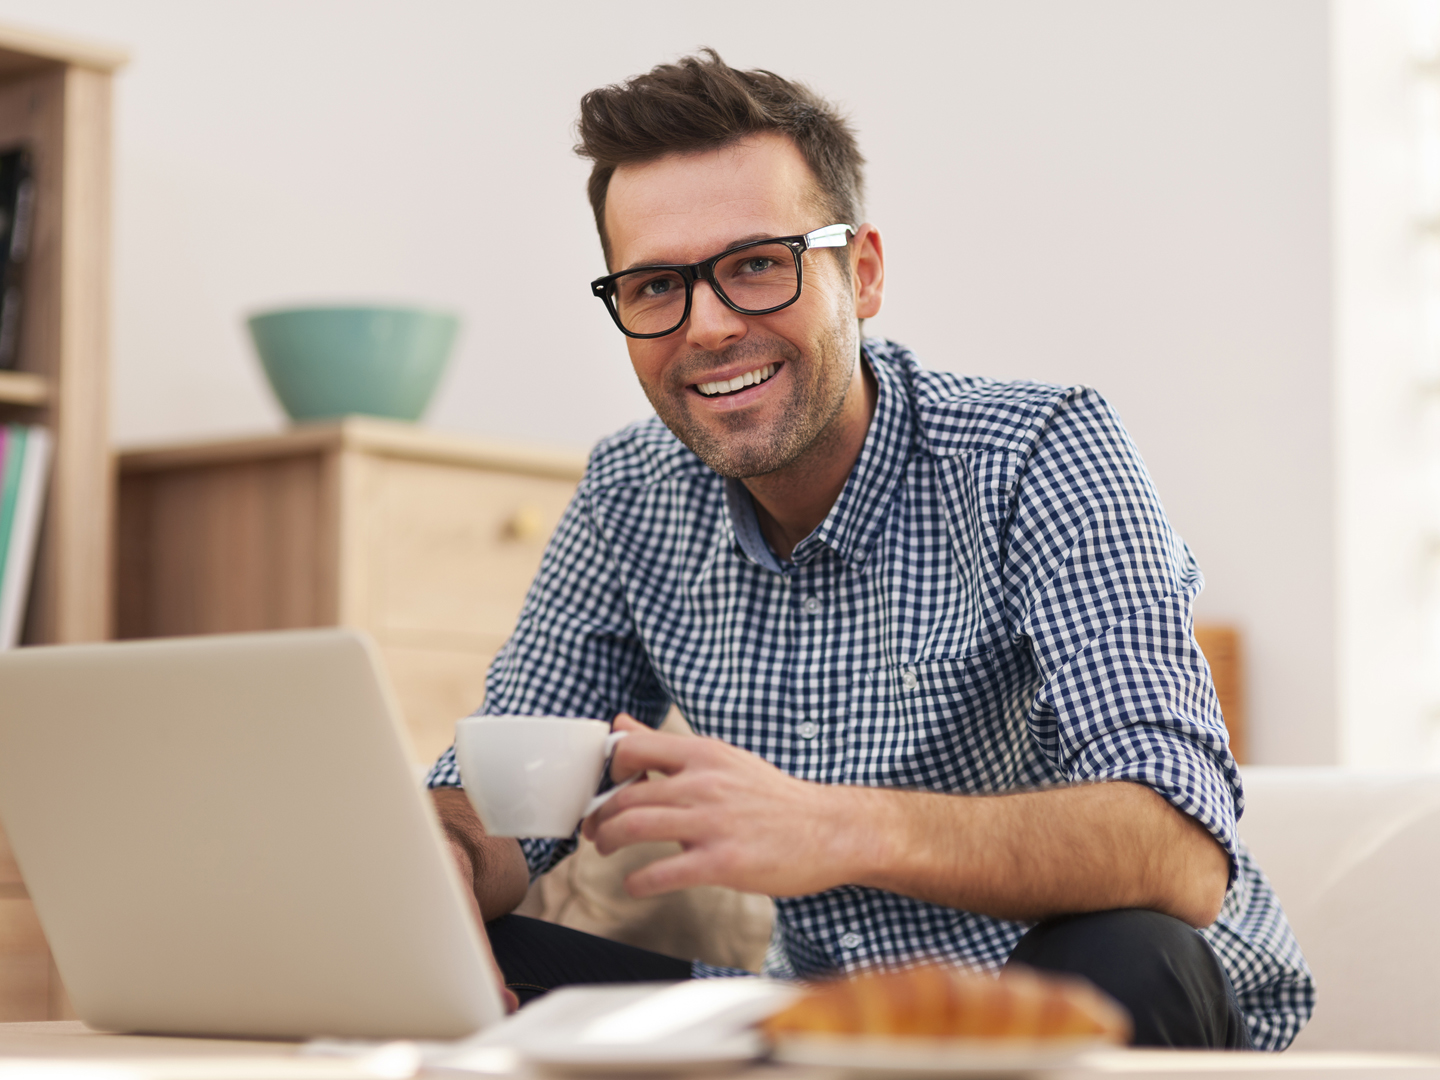 Portrait of smiling man working at home